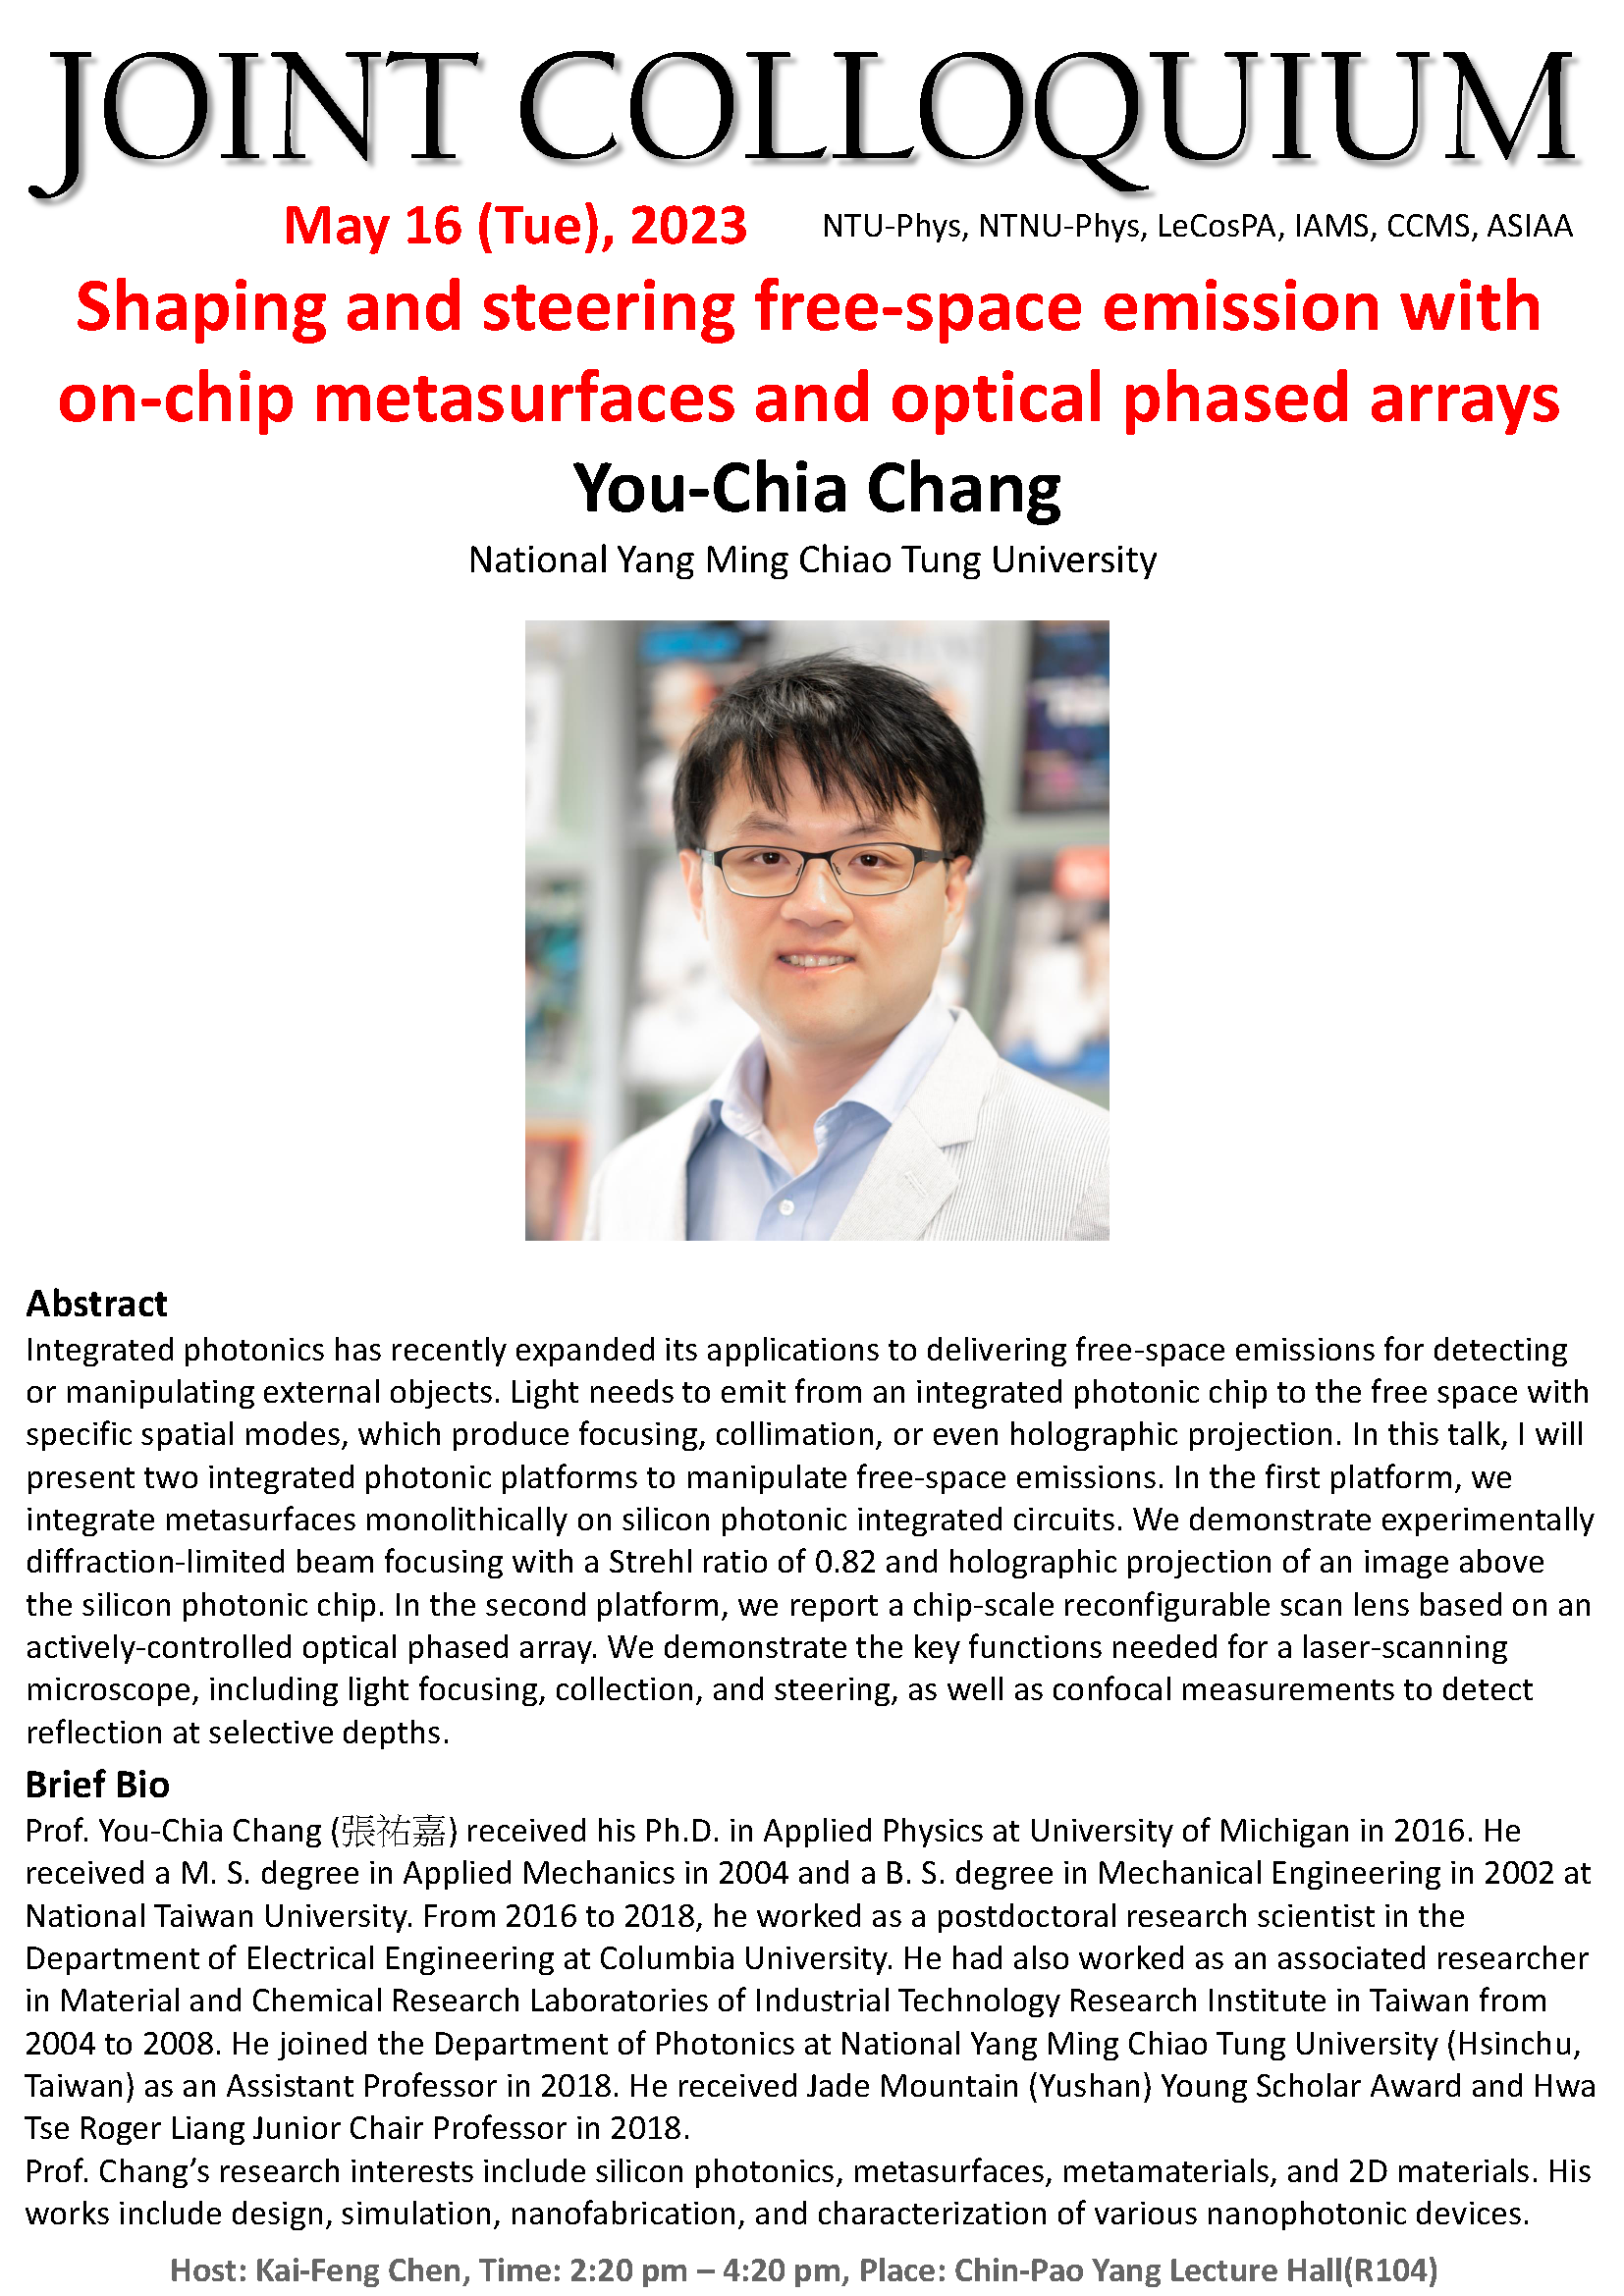 Shaping and steering free-space emission with on-chip metasurfaces and optical phased arrays